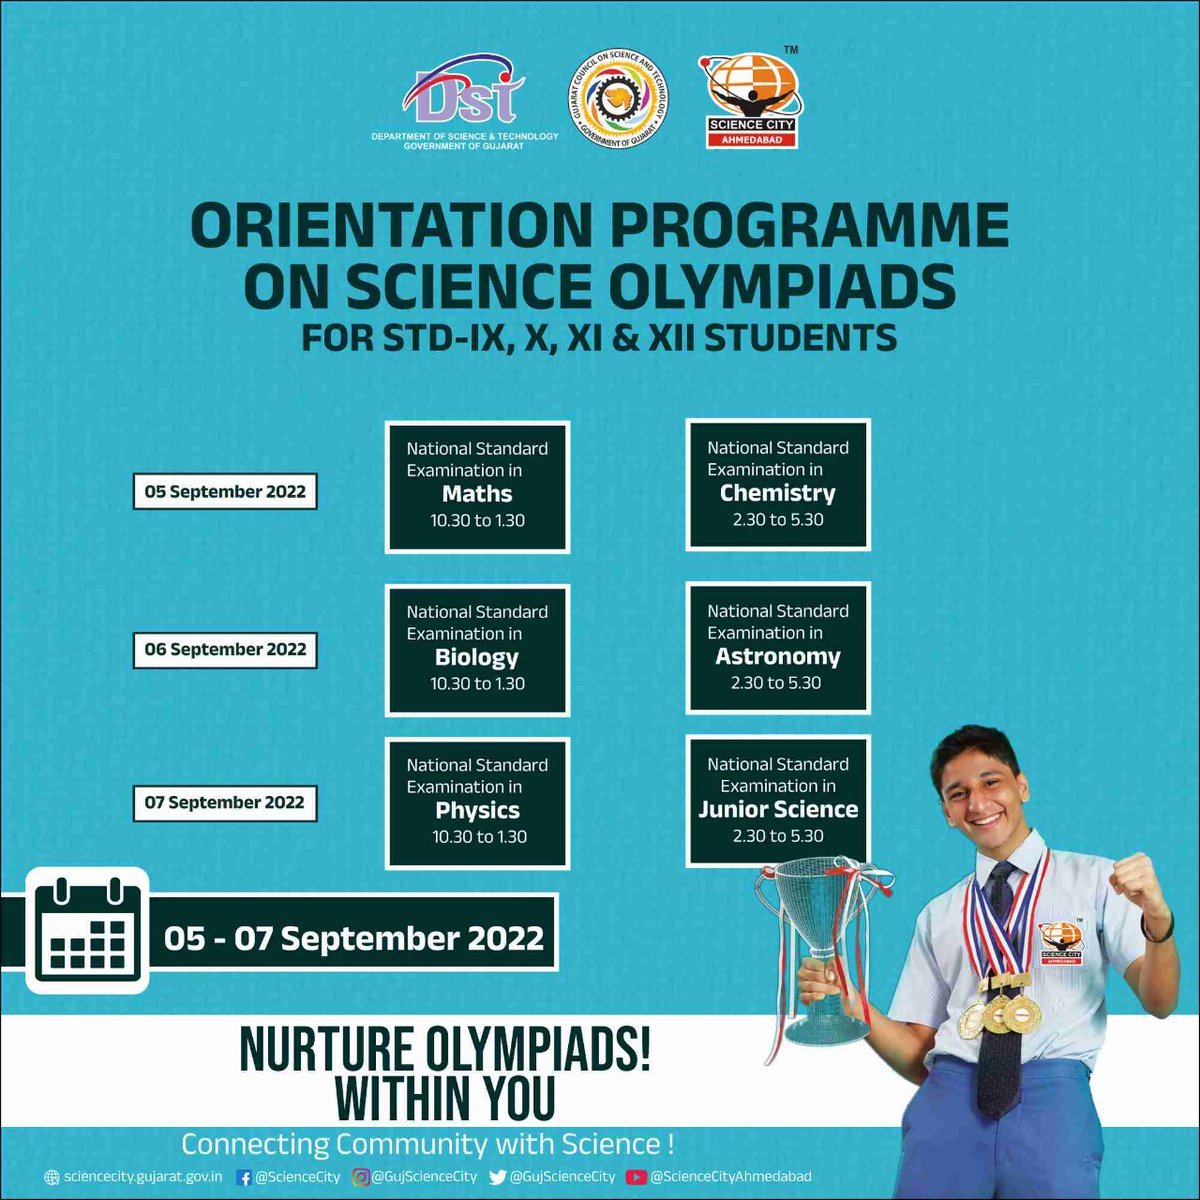 It’s great #excitement for fulfilling students #dream during their #career and to open a door for the #future .

#Students who would like to show their #talent at #national and #International #ScienceOlympiads held in different countries, next year can prepare themselves now.